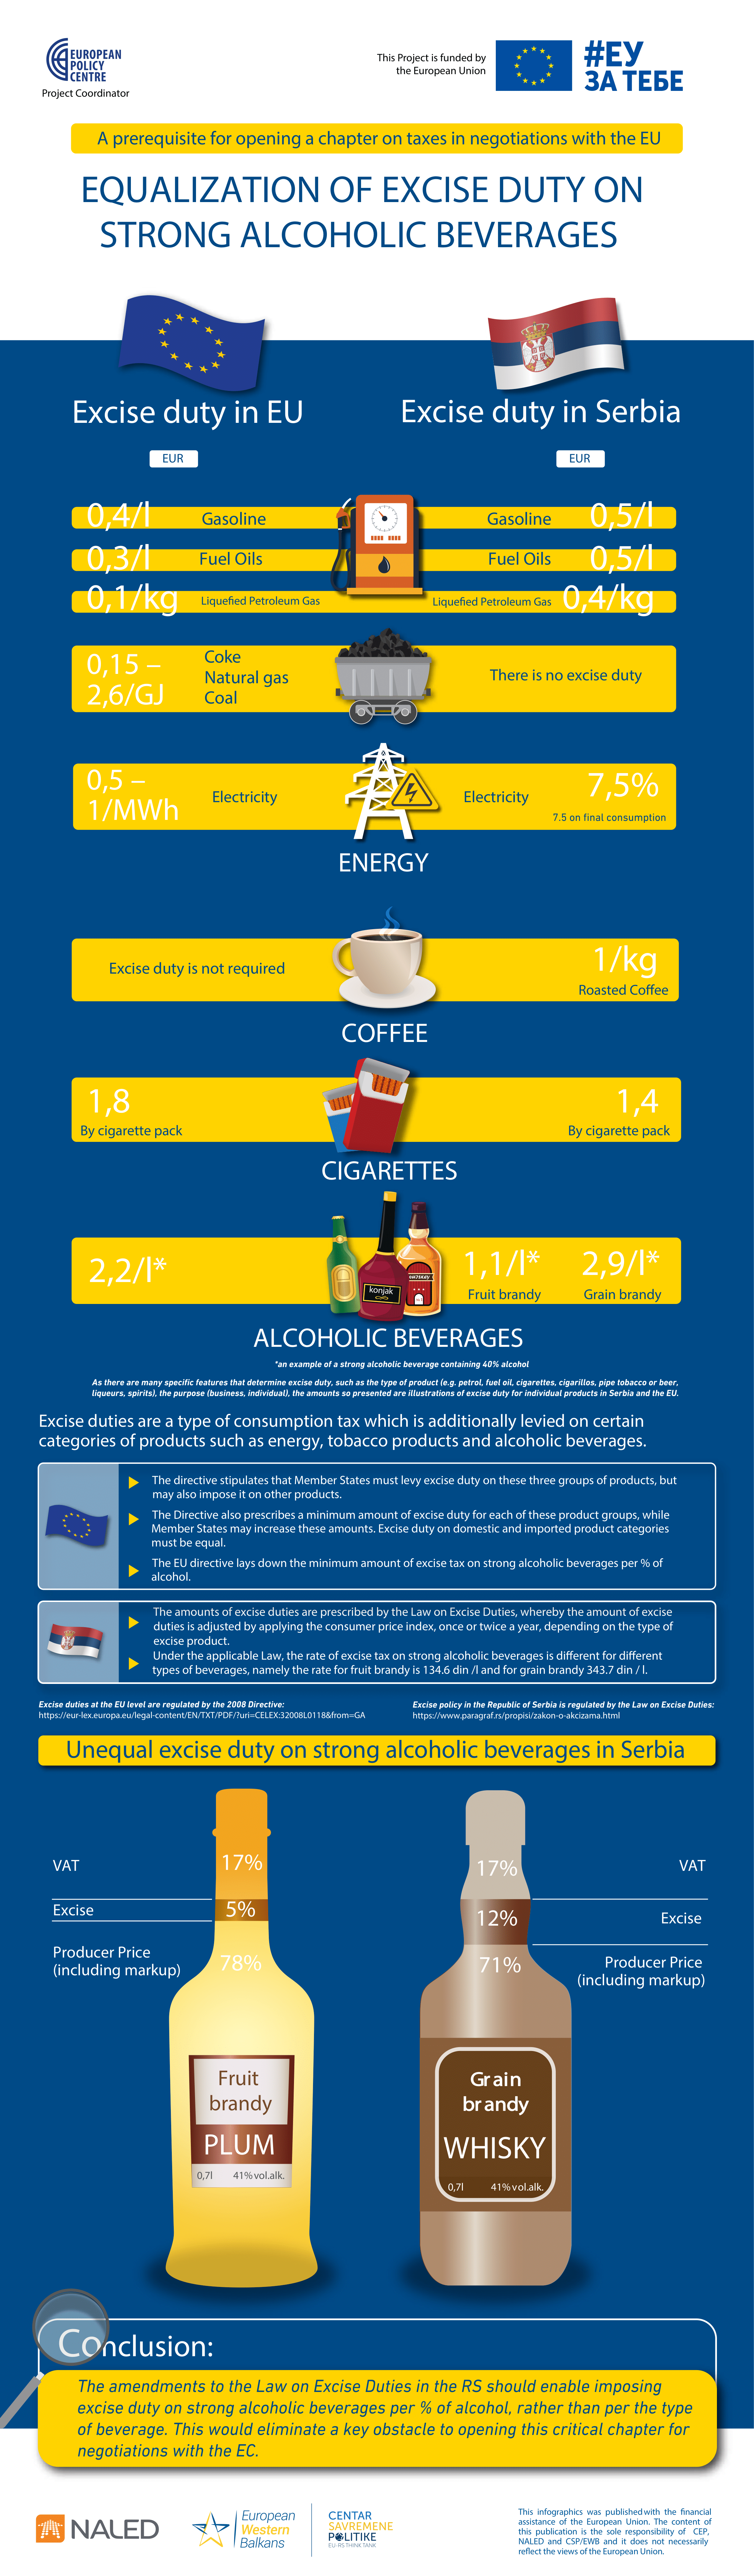 Infographic-Equalization_of_Excise_Duty_on_Strong_Alcoholic_Beverages-1.png